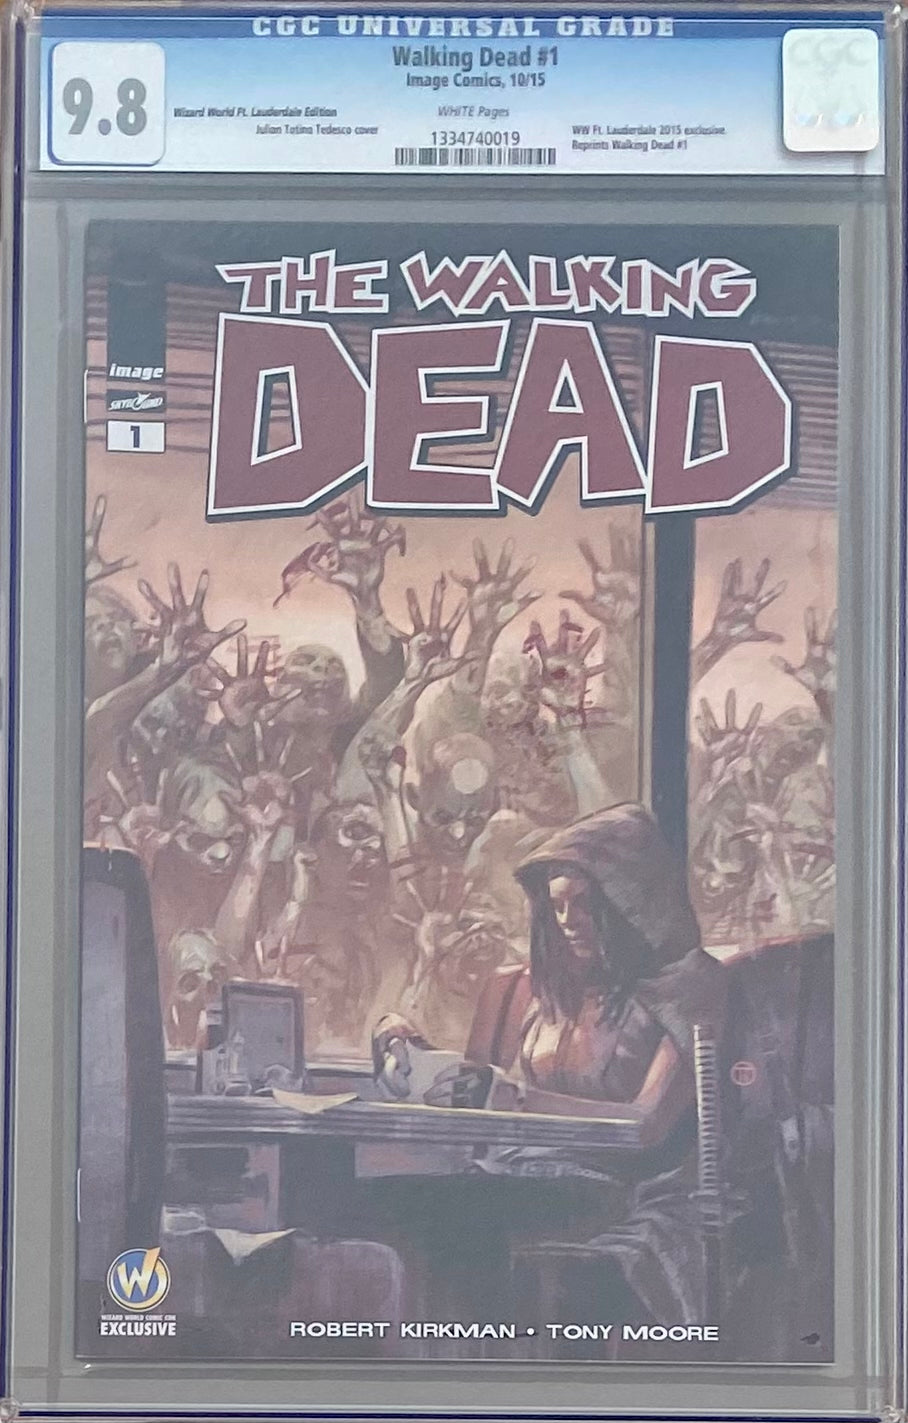 Walking Dead #1 Wizard World Ft. Lauderdale Edition Variant CGC 9.8